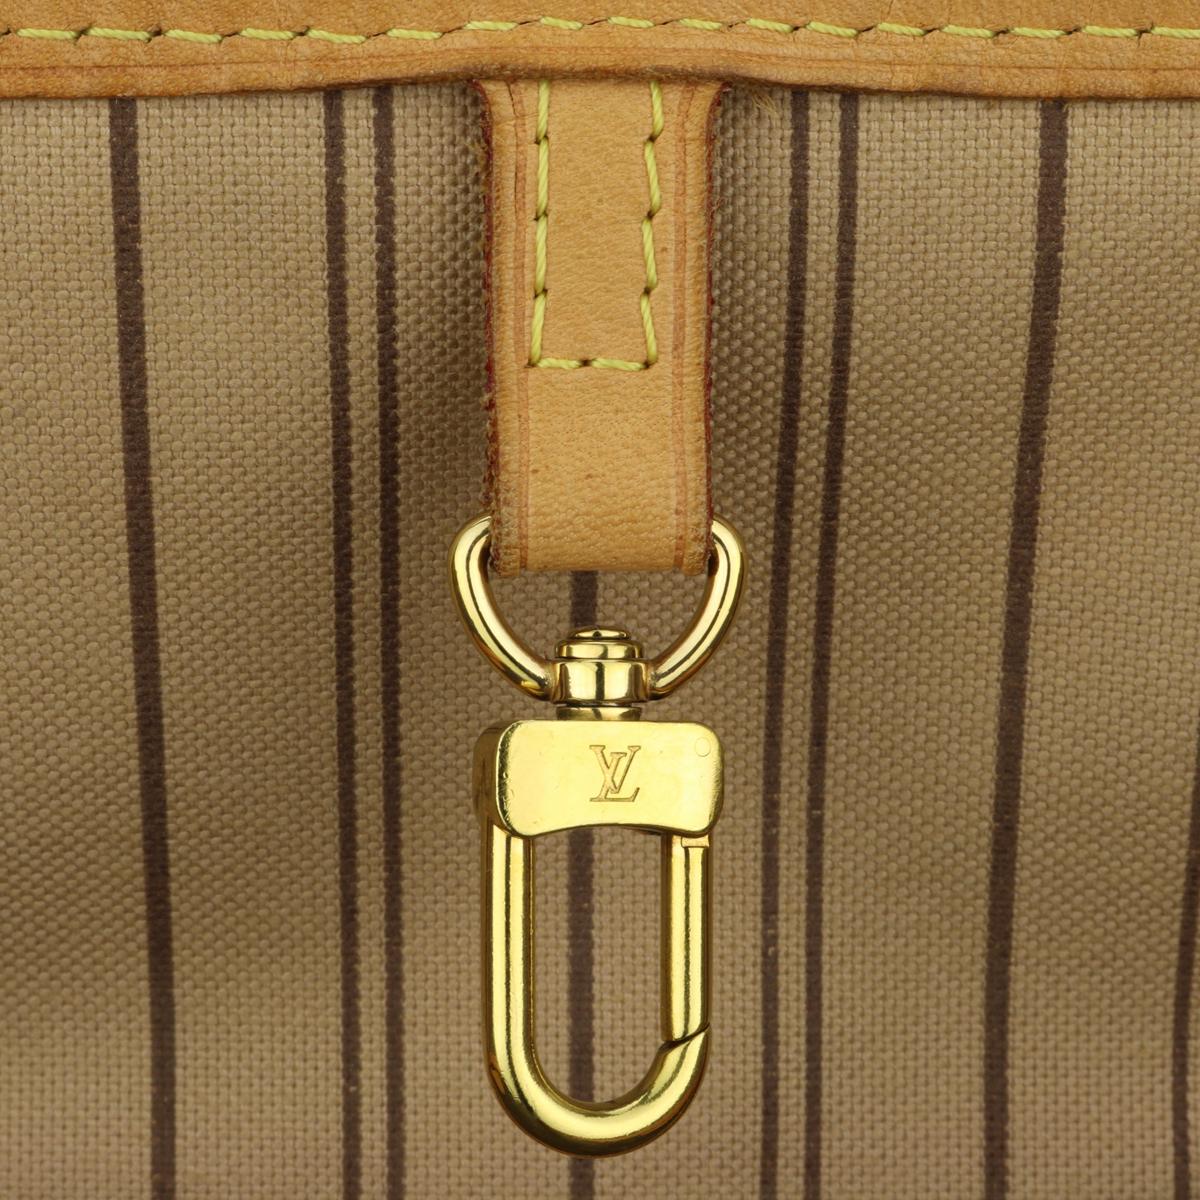 Louis Vuitton Neverfull MM Bag in Monogram with Beige Interior 2016 8